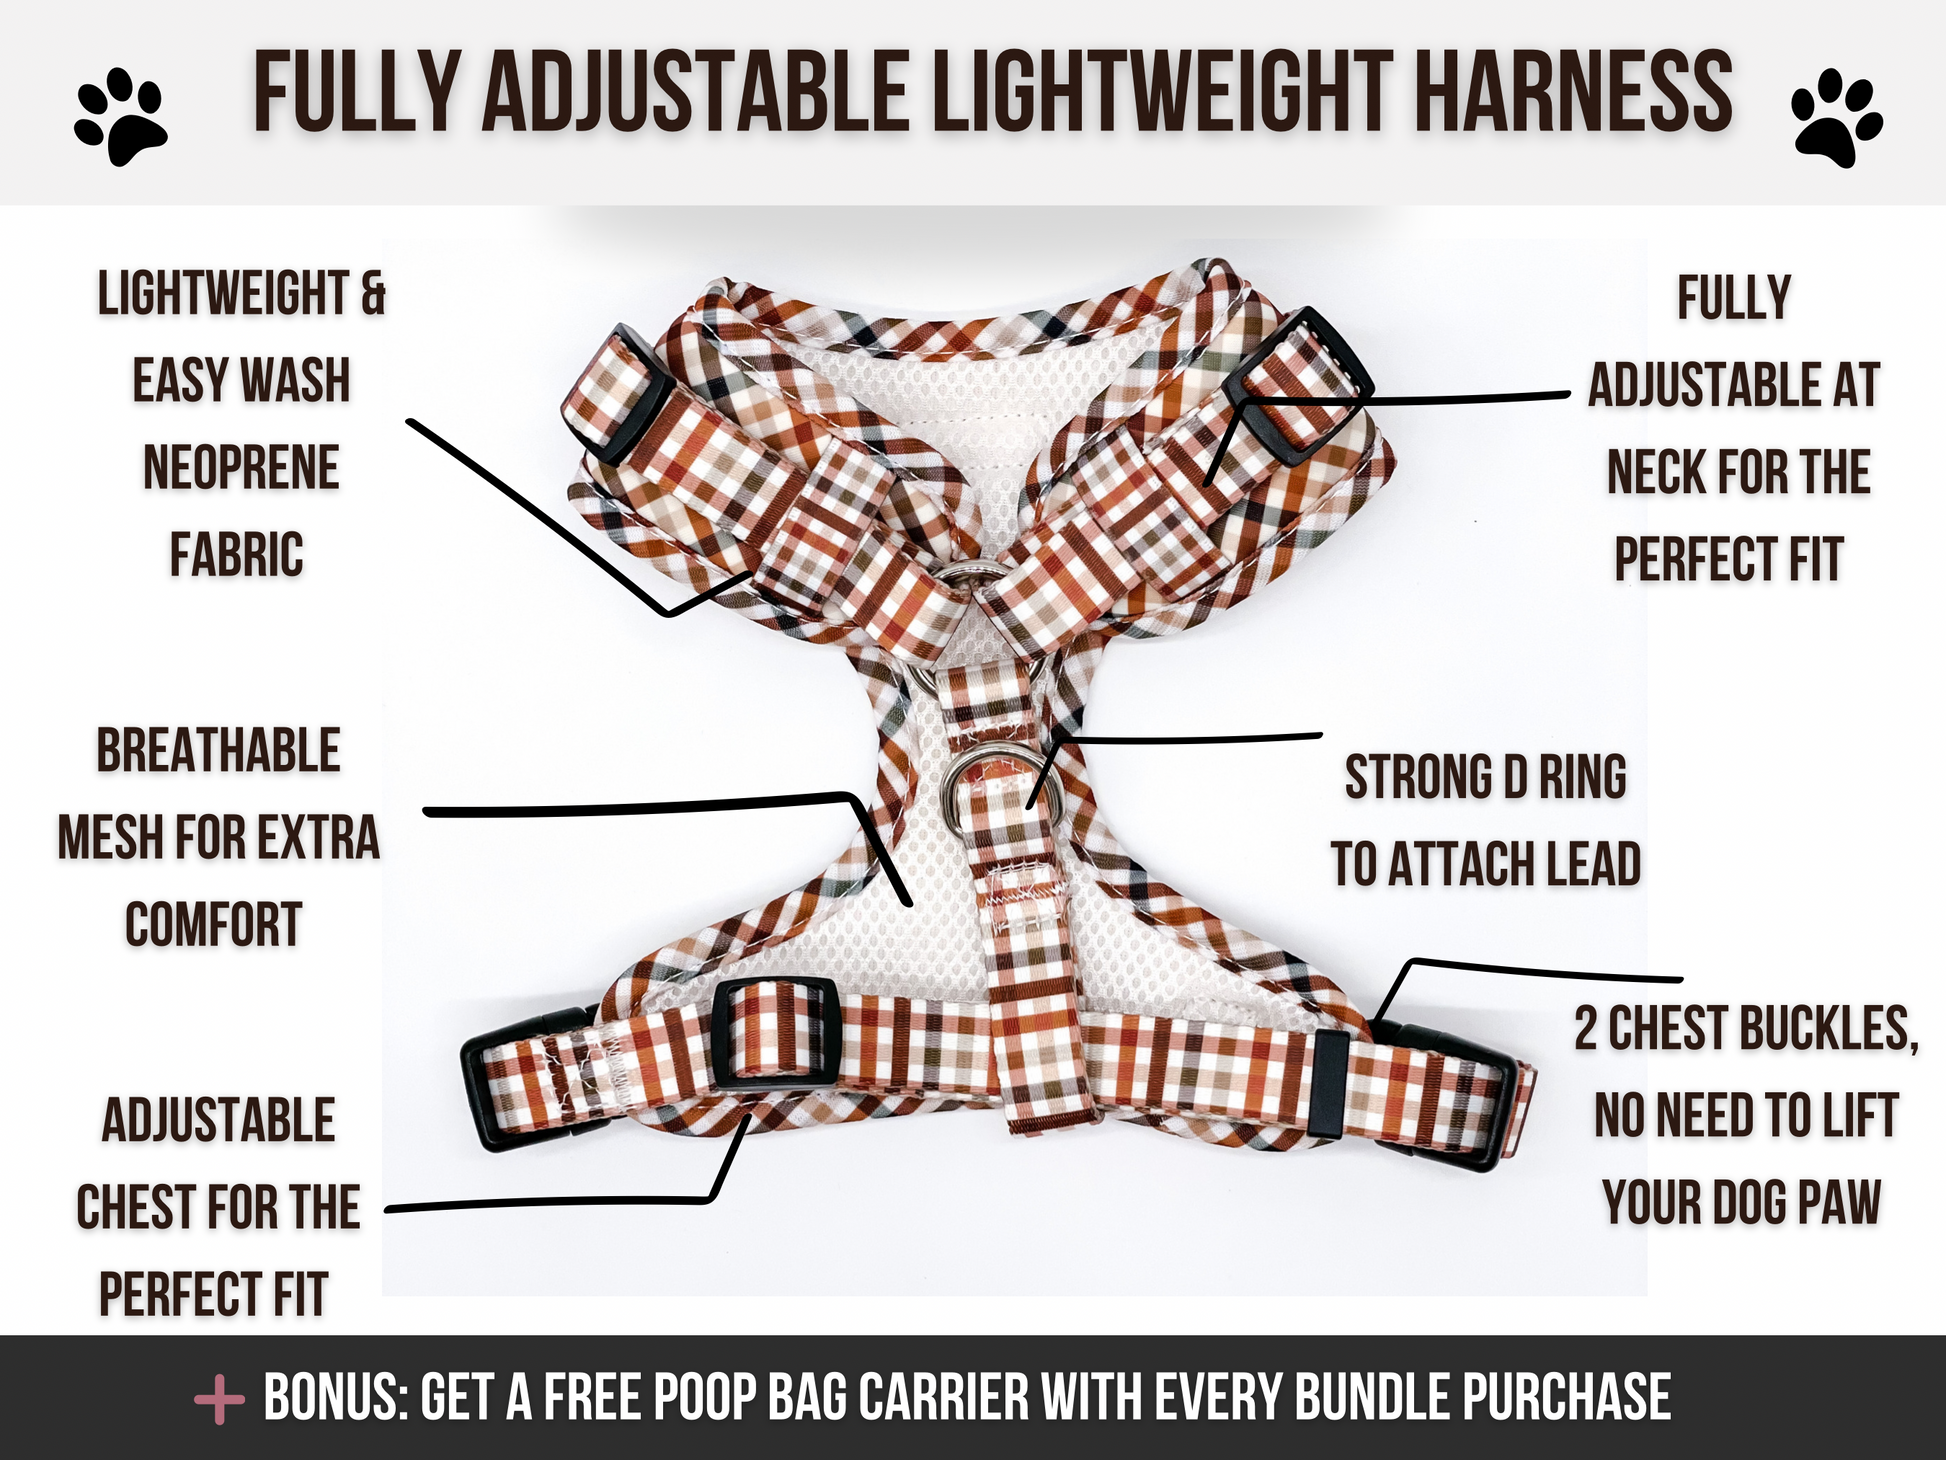 Adjustable dog harness features